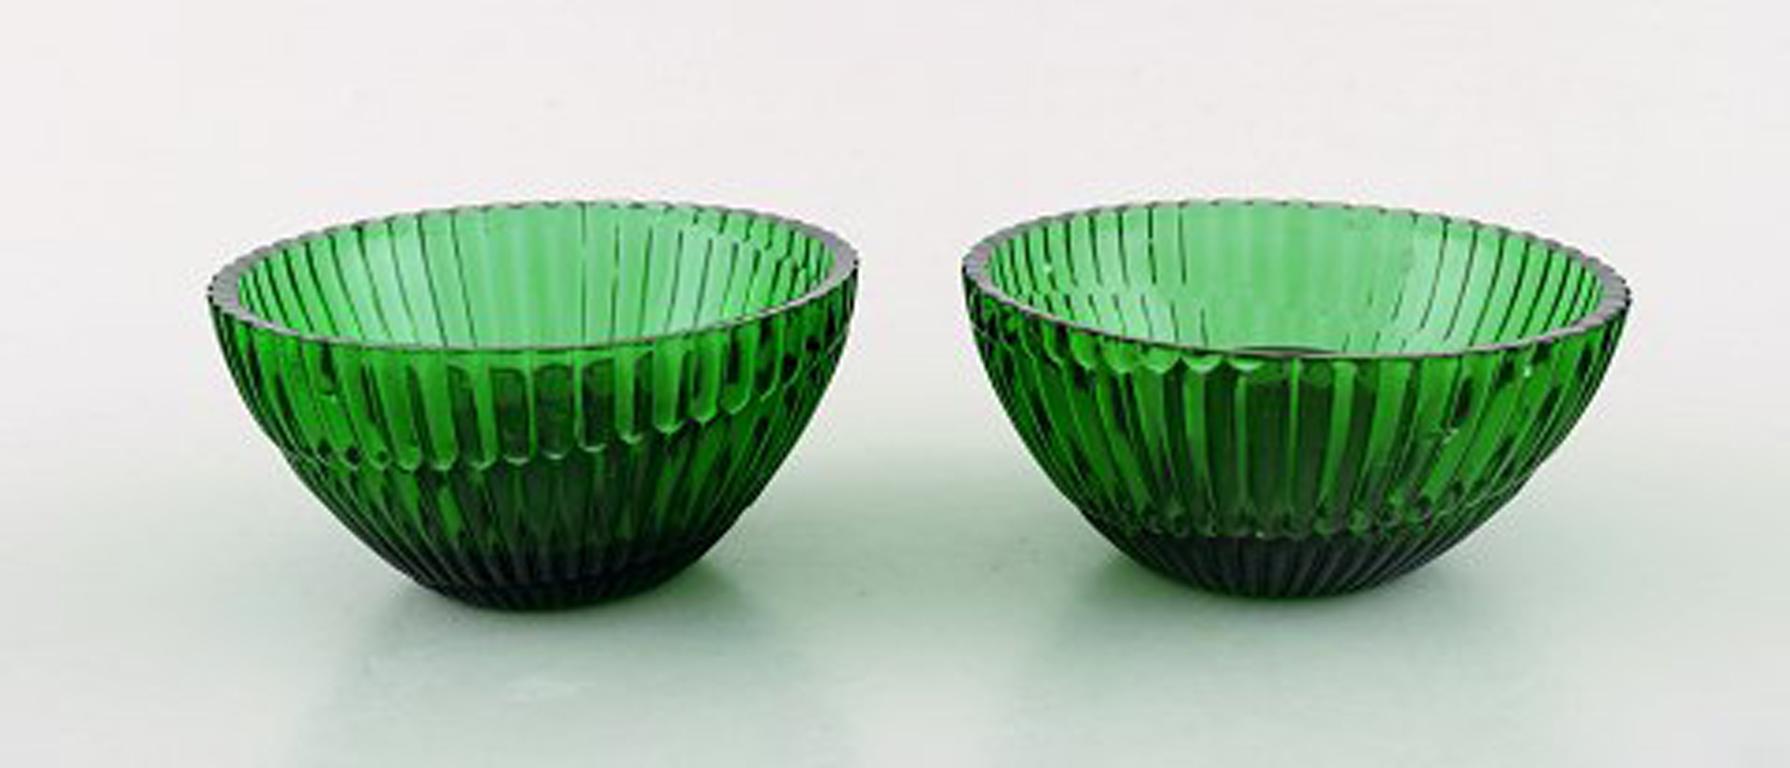 Arthur Percy for Nybro Sweden. Collection of green art glass. 9 pieces, 2 pairs of candlesticks, creamers, etc.
In perfect condition.
Measures: Large creamer: 11 x 9 cm.
Sticker.